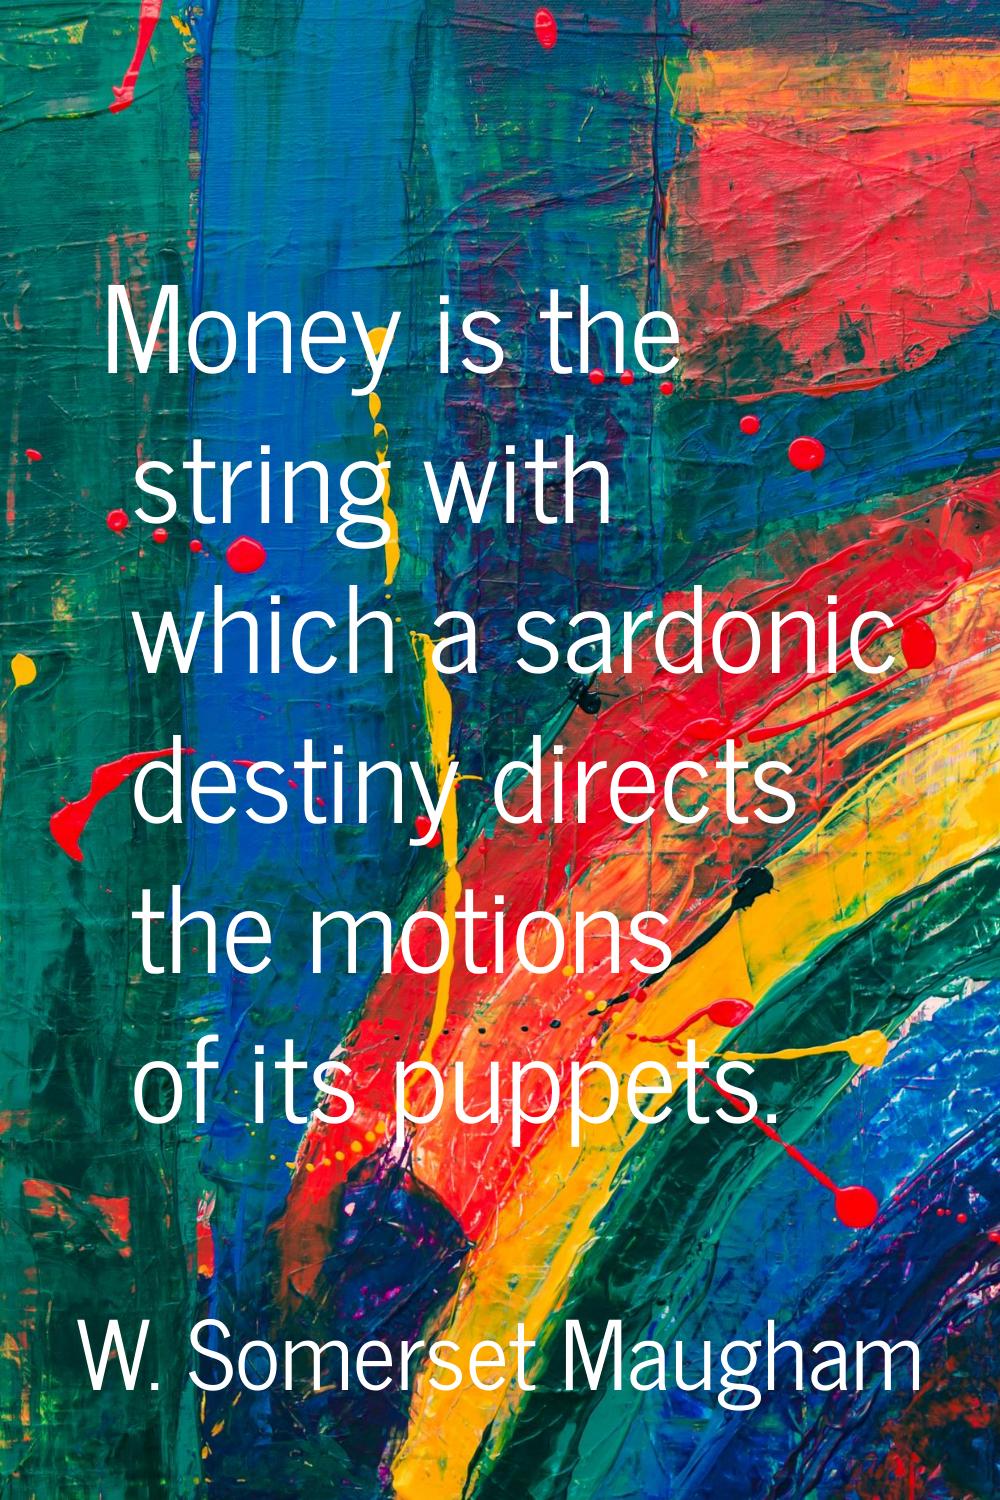 Money is the string with which a sardonic destiny directs the motions of its puppets.